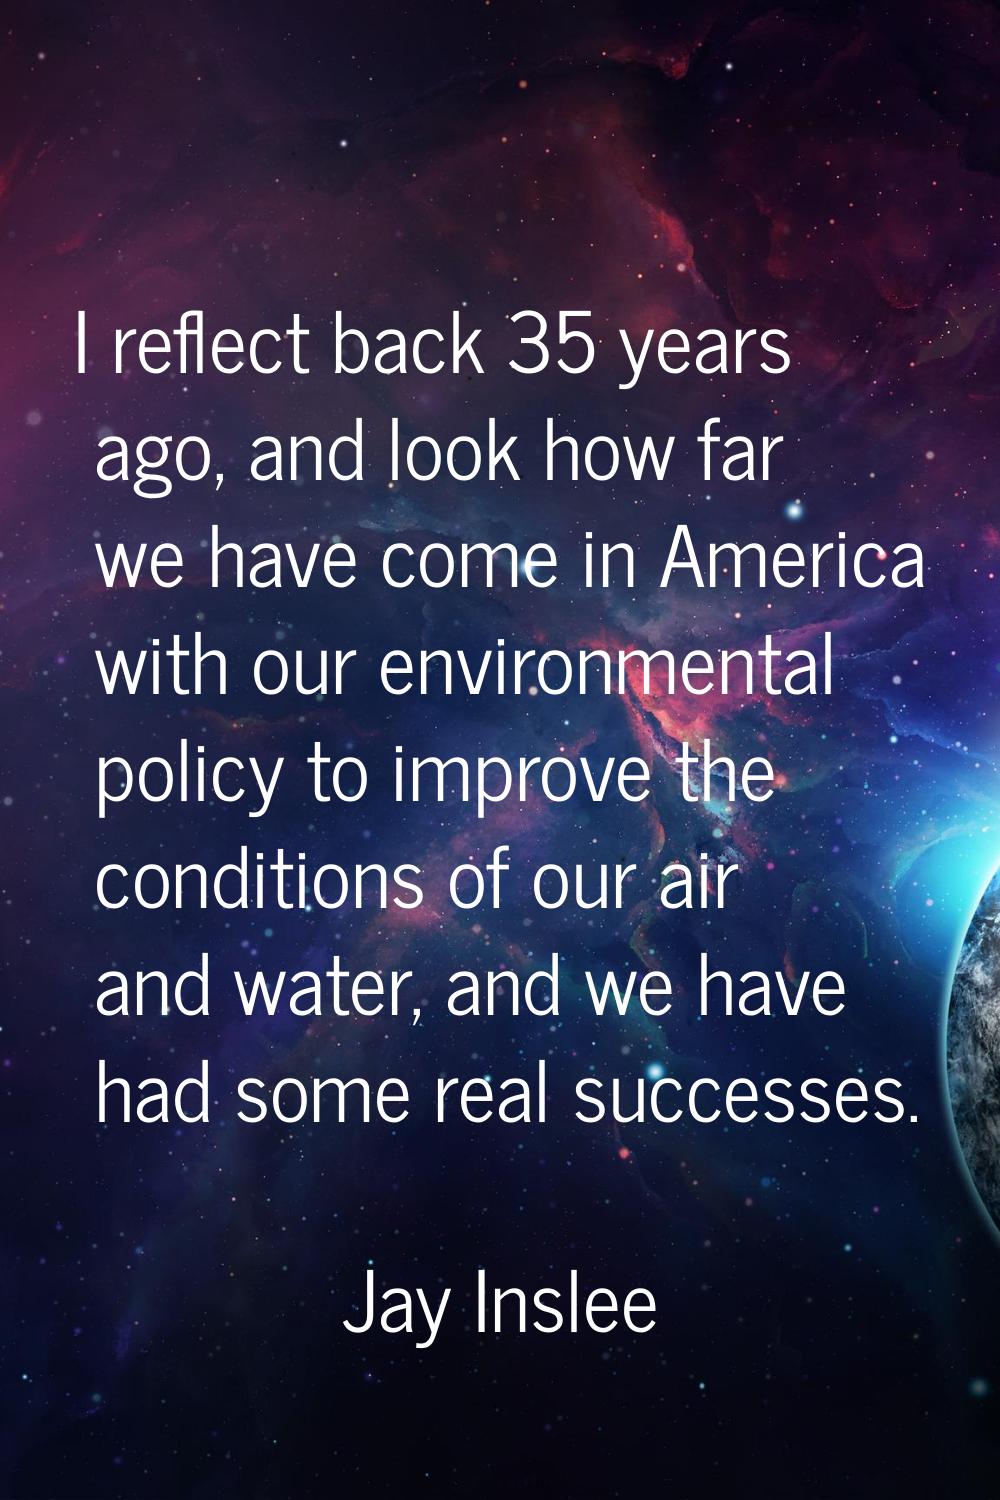 I reflect back 35 years ago, and look how far we have come in America with our environmental policy